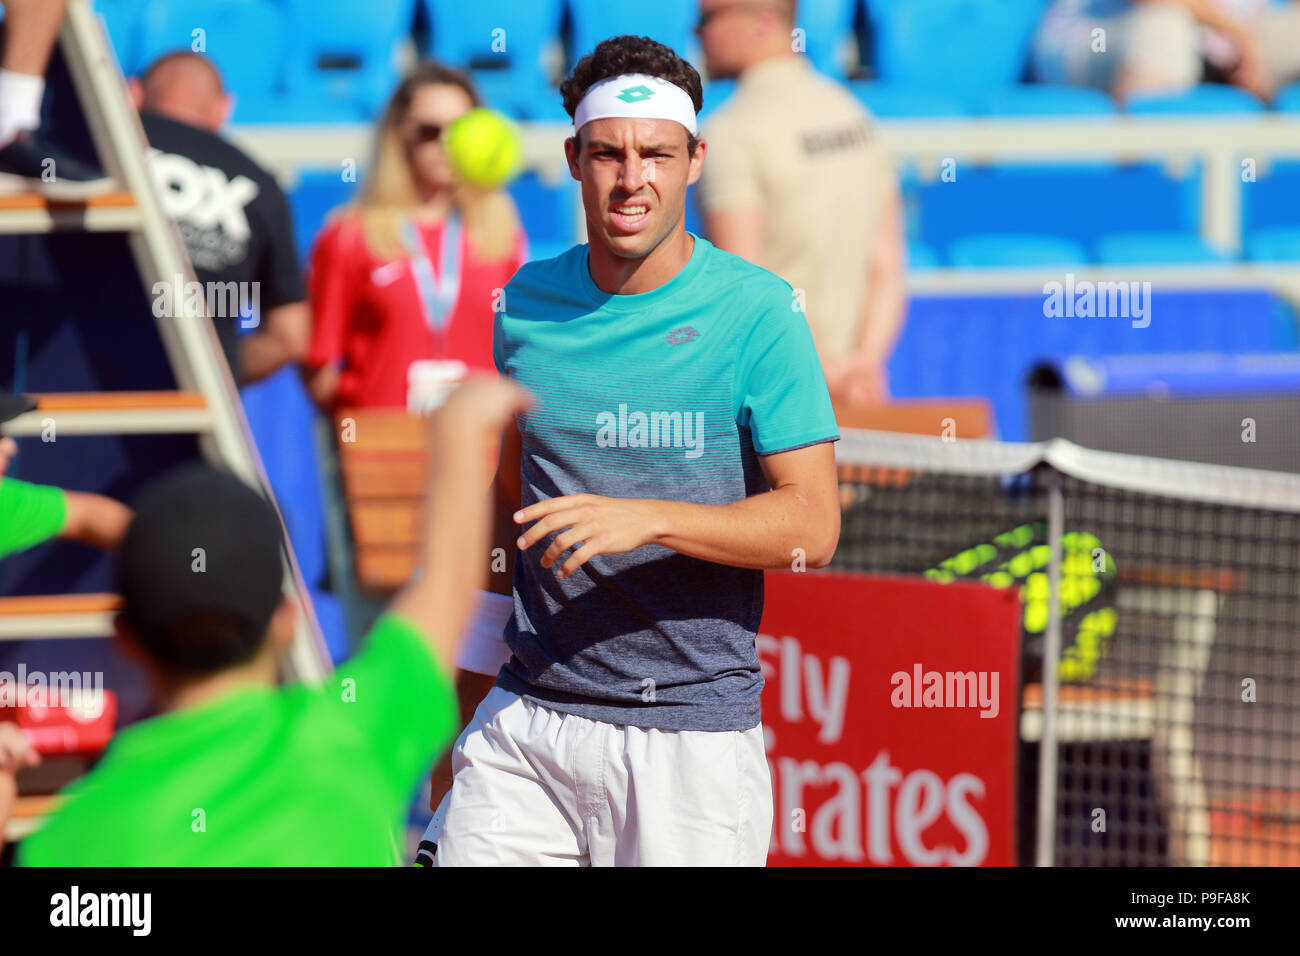 Umag, Croatia. 18th July 2018. CROATIA, Umag: Marco Cecchinato of Italy eyes the ball during the singles match Vesely v Cecchinato at the ATP 29th Plava laguna Croatia Open Umag tournament at the at the Goran Ivanisevic ATP Stadium, on July 18, 2018 in Umag. Credit: Andrea Spinelli/Alamy Live News Stock Photo